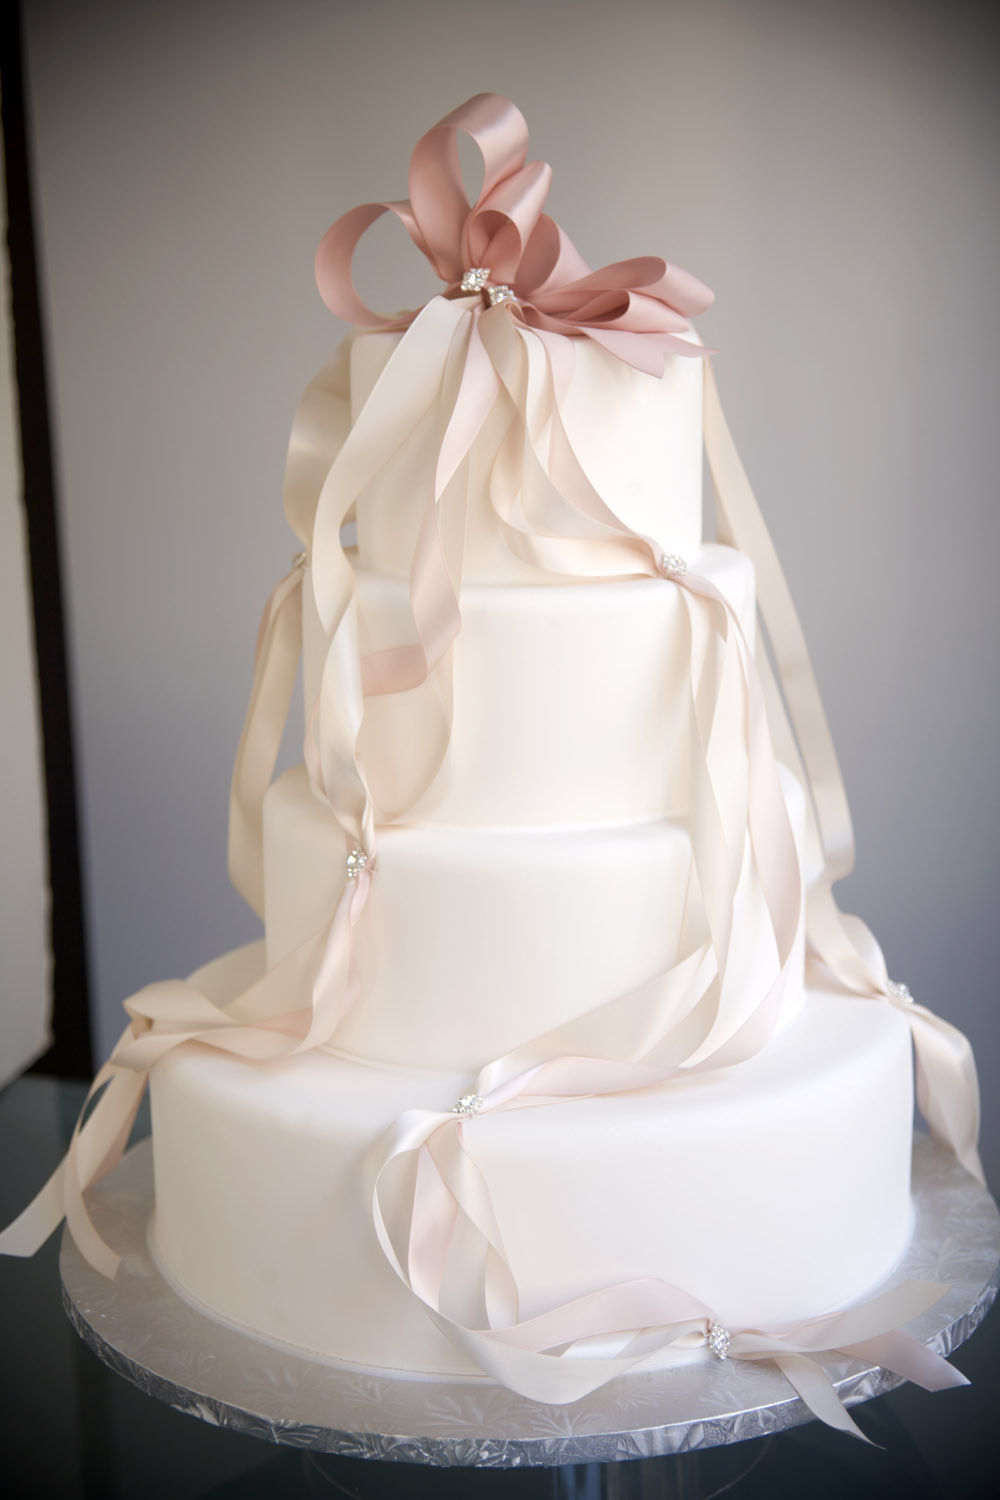 Ribboned Wedding Cakes
 A Simple Cake Crystal decorations DIY bling